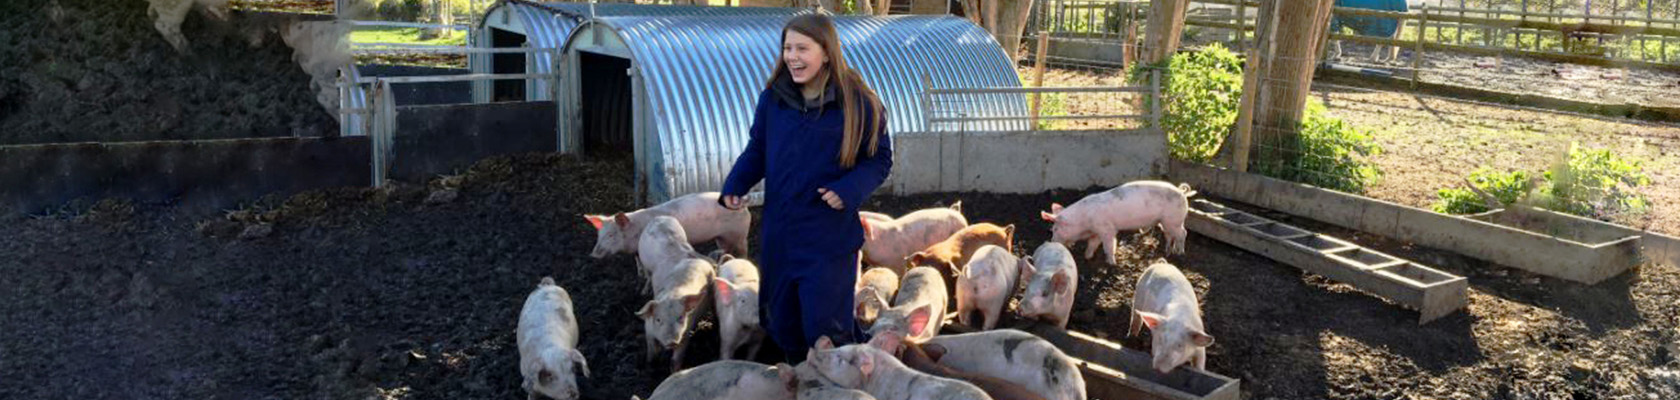 A girl is surrounded by little pigs, eating their food